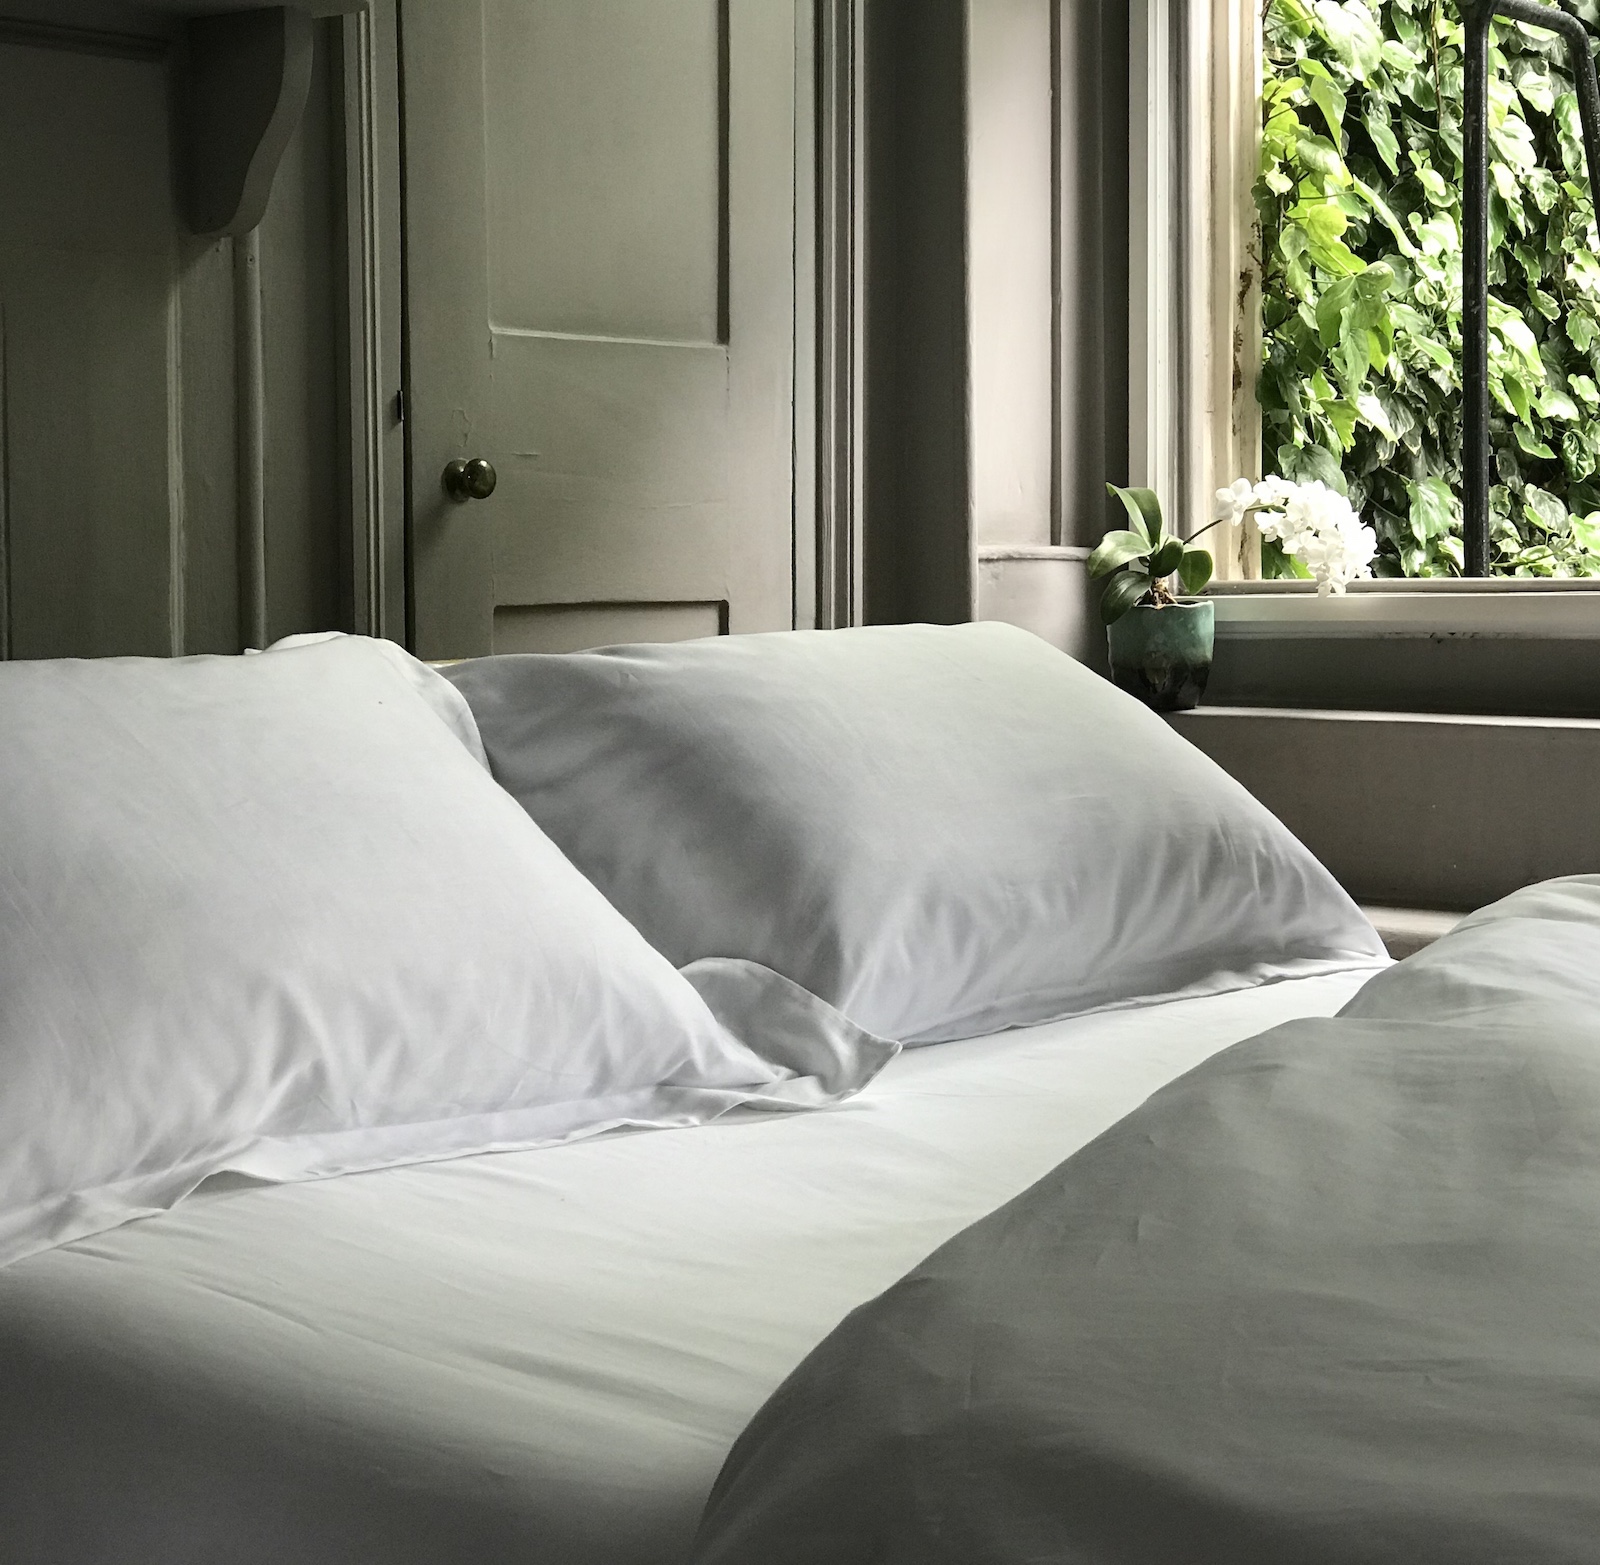 The Natural Cotton Company &#8211; why is it important to offer guests genuinely sustainable products?